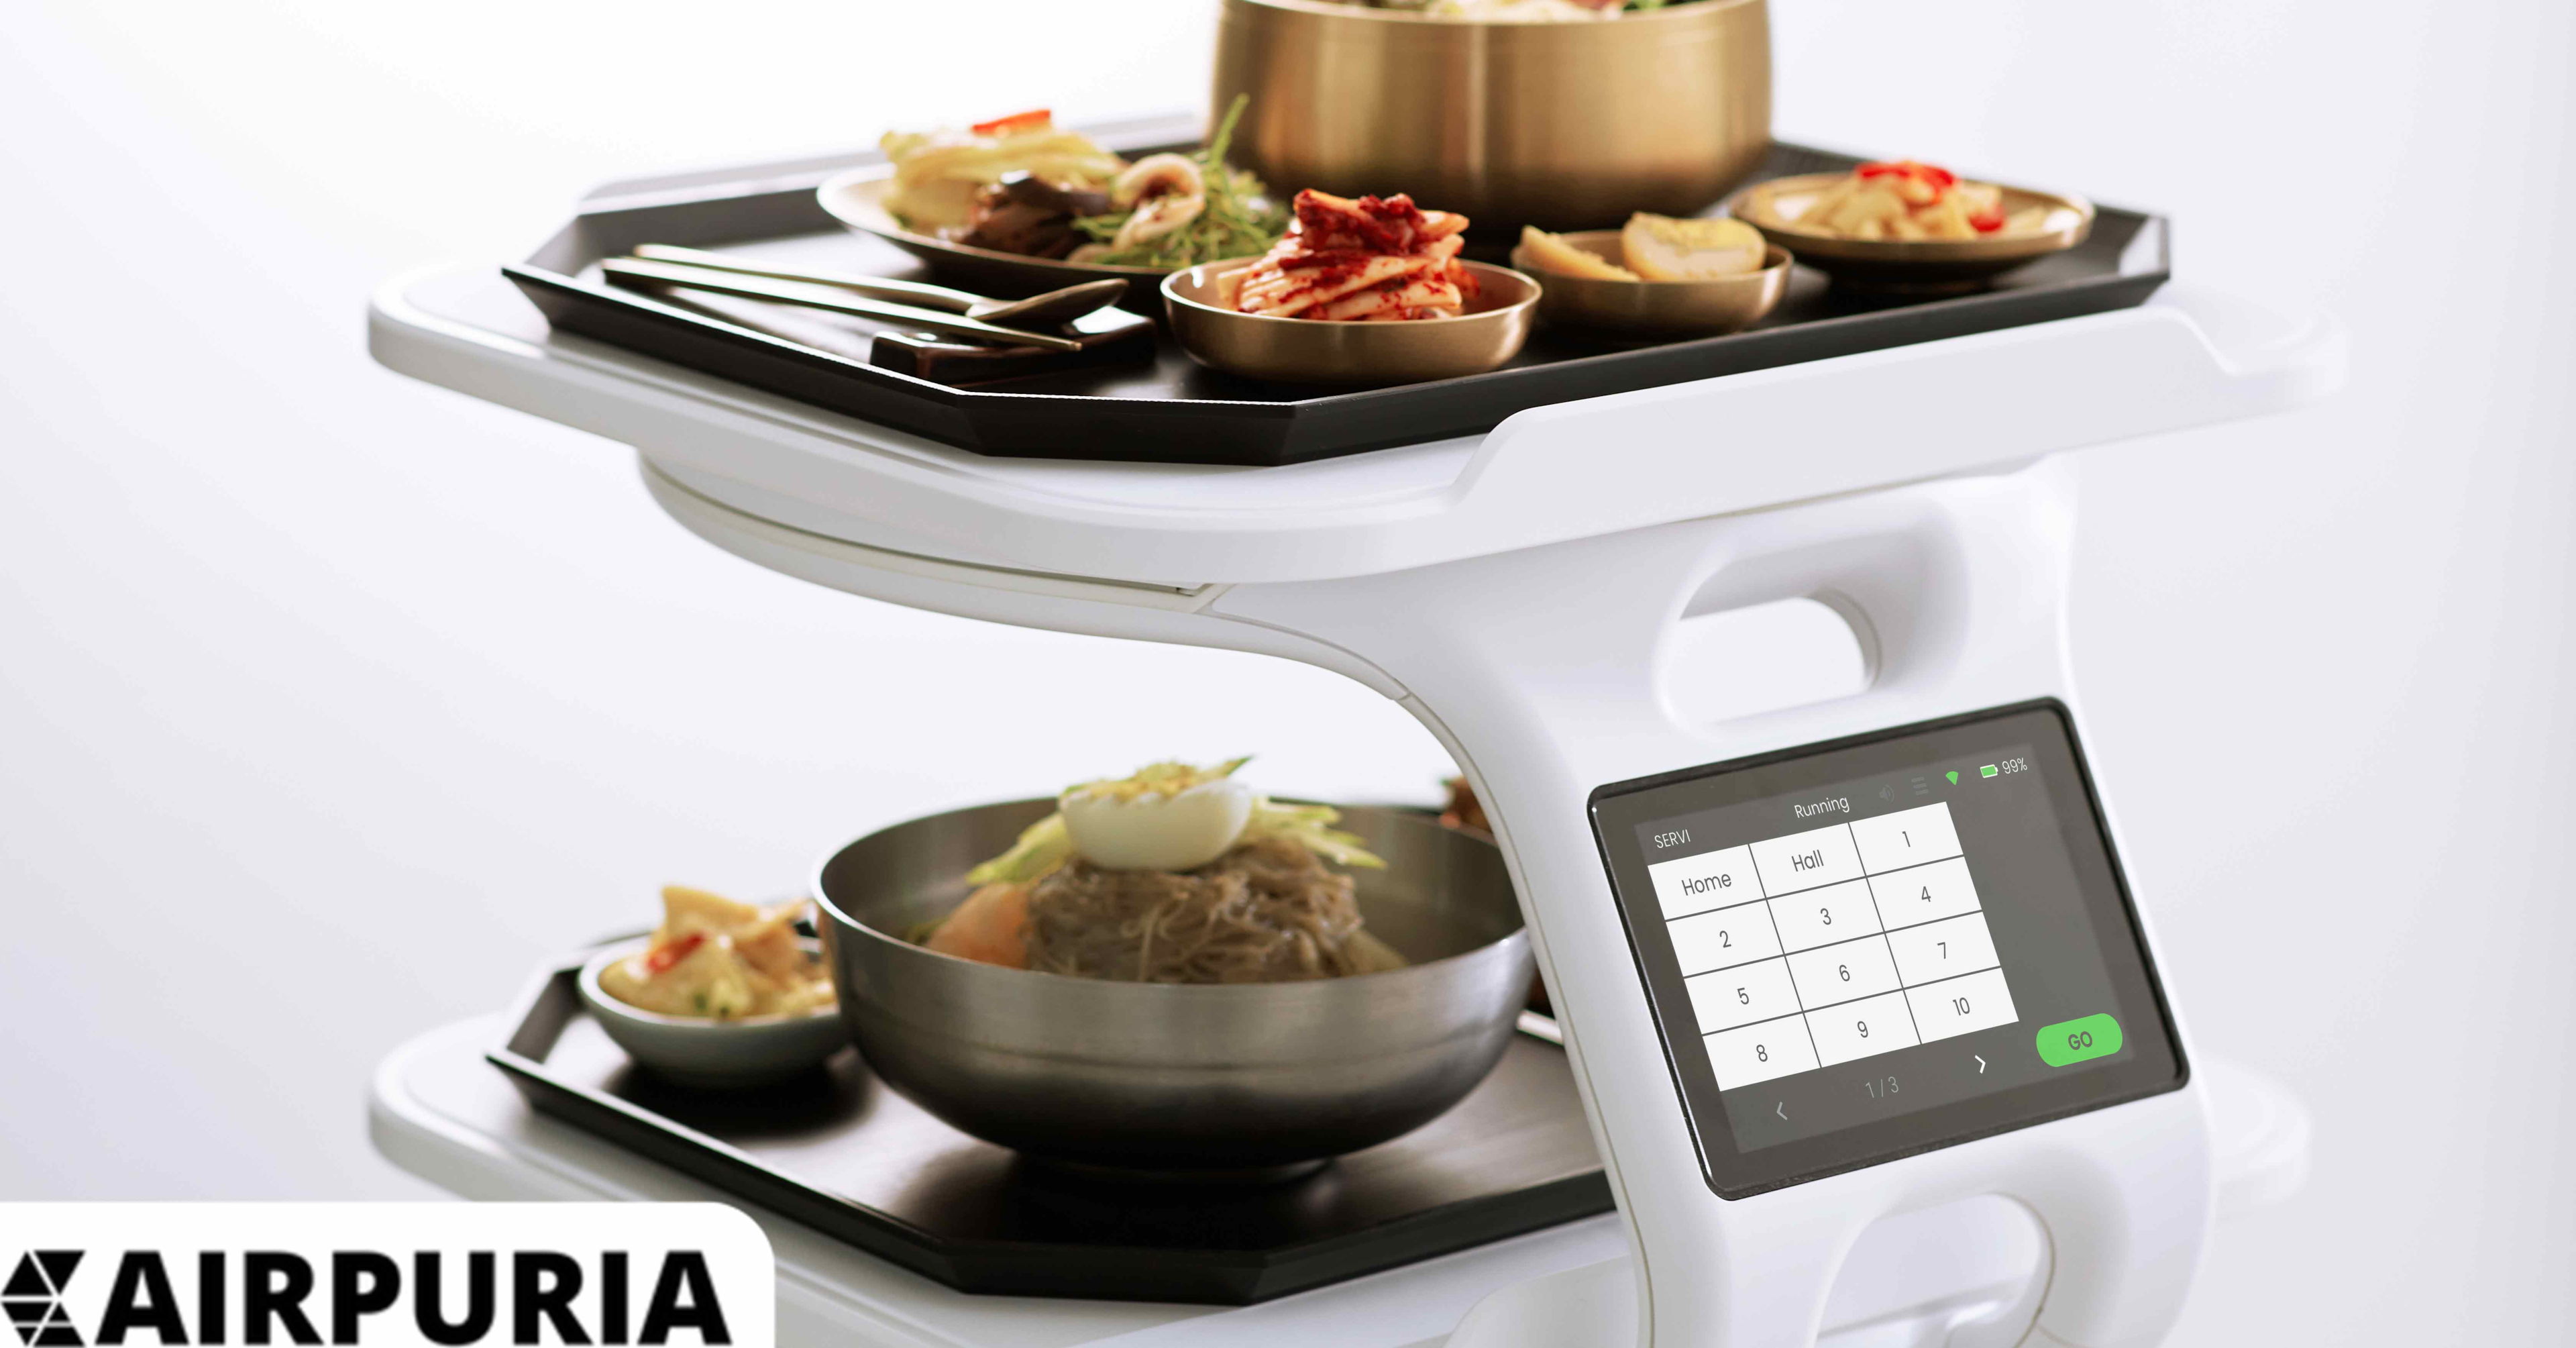 Image of a company relying on technology - food service robot Servi 